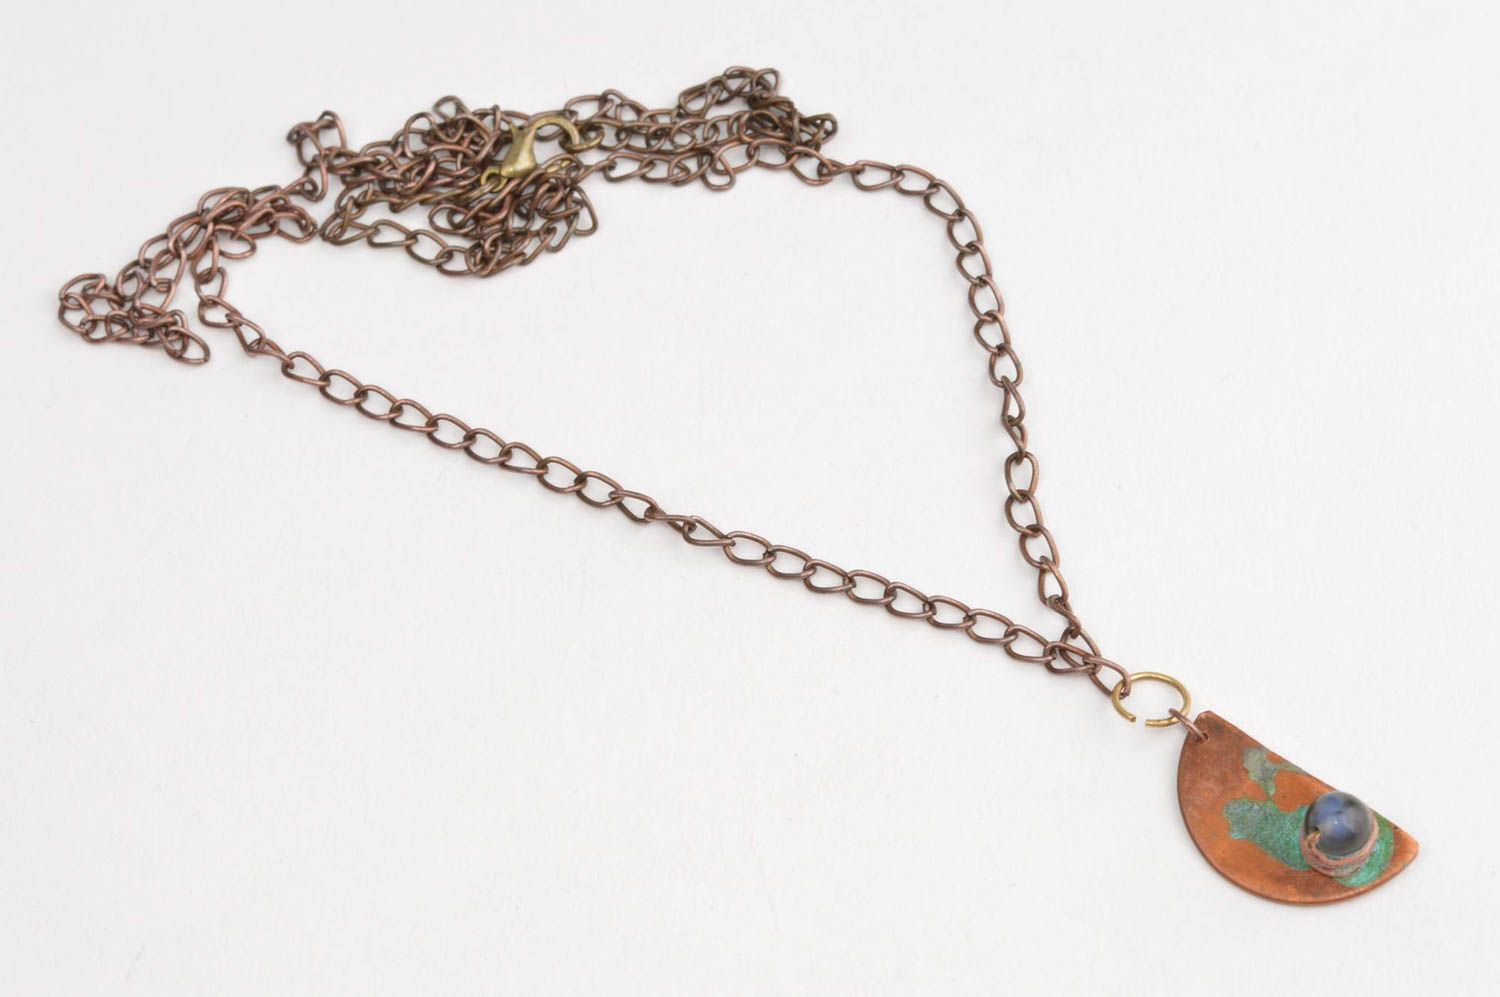 Copper neck accessory jewelry with natural stones unusual accessory gift ideas photo 3